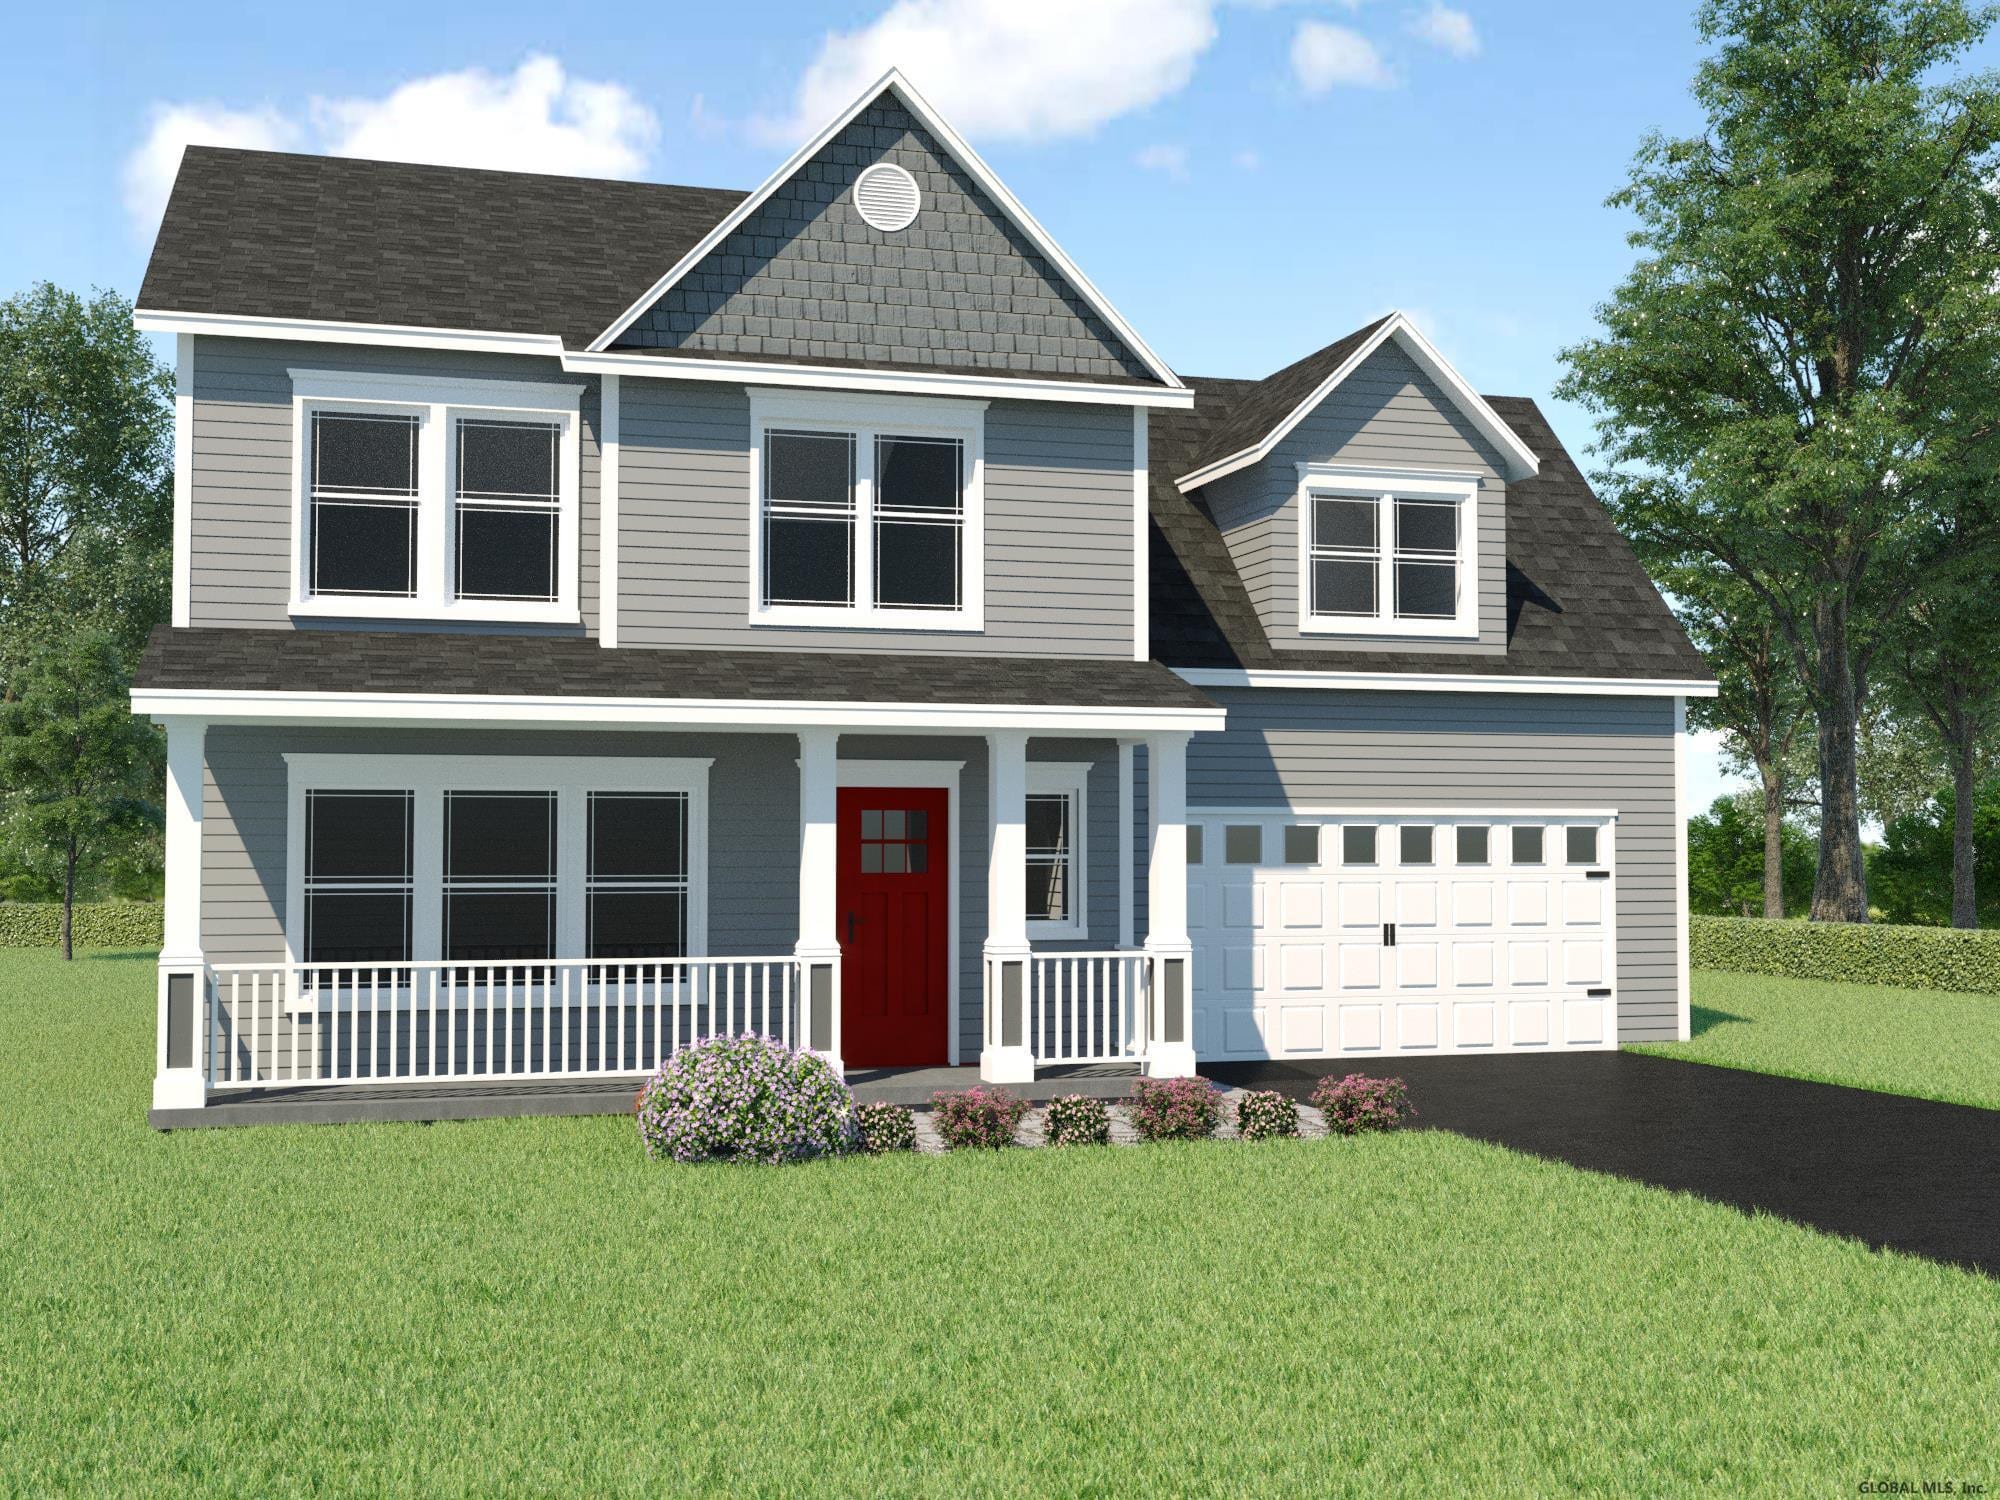 Rendering of gray colonial